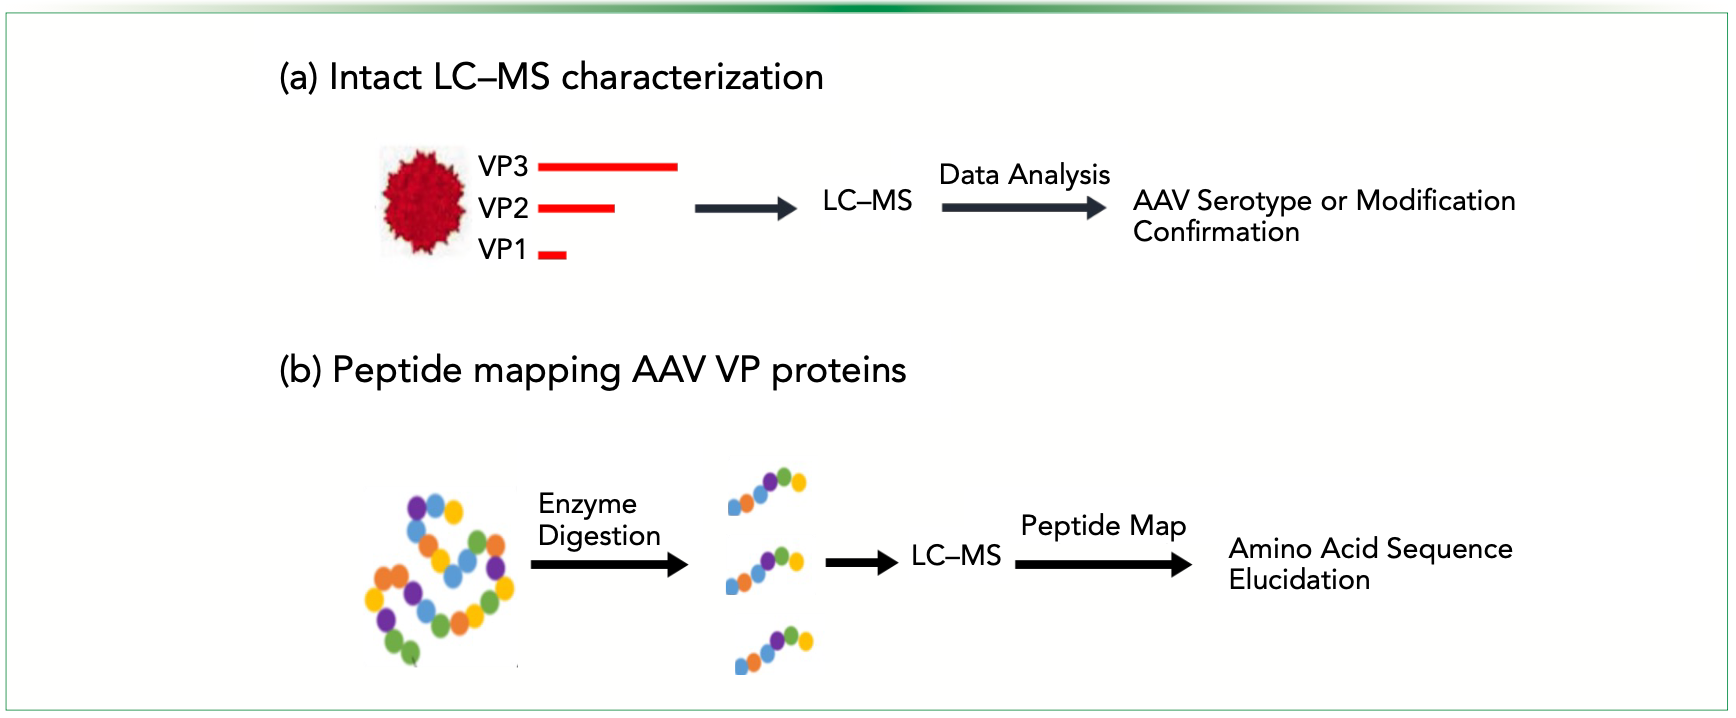 FIGURE 2: Schematic diagrams of AAV capsid characterization workflow: (a) Intact LC–MS analysis, and (b) and peptide mapping amino acid sequence of VP proteins. Figure adapted from reference (21).